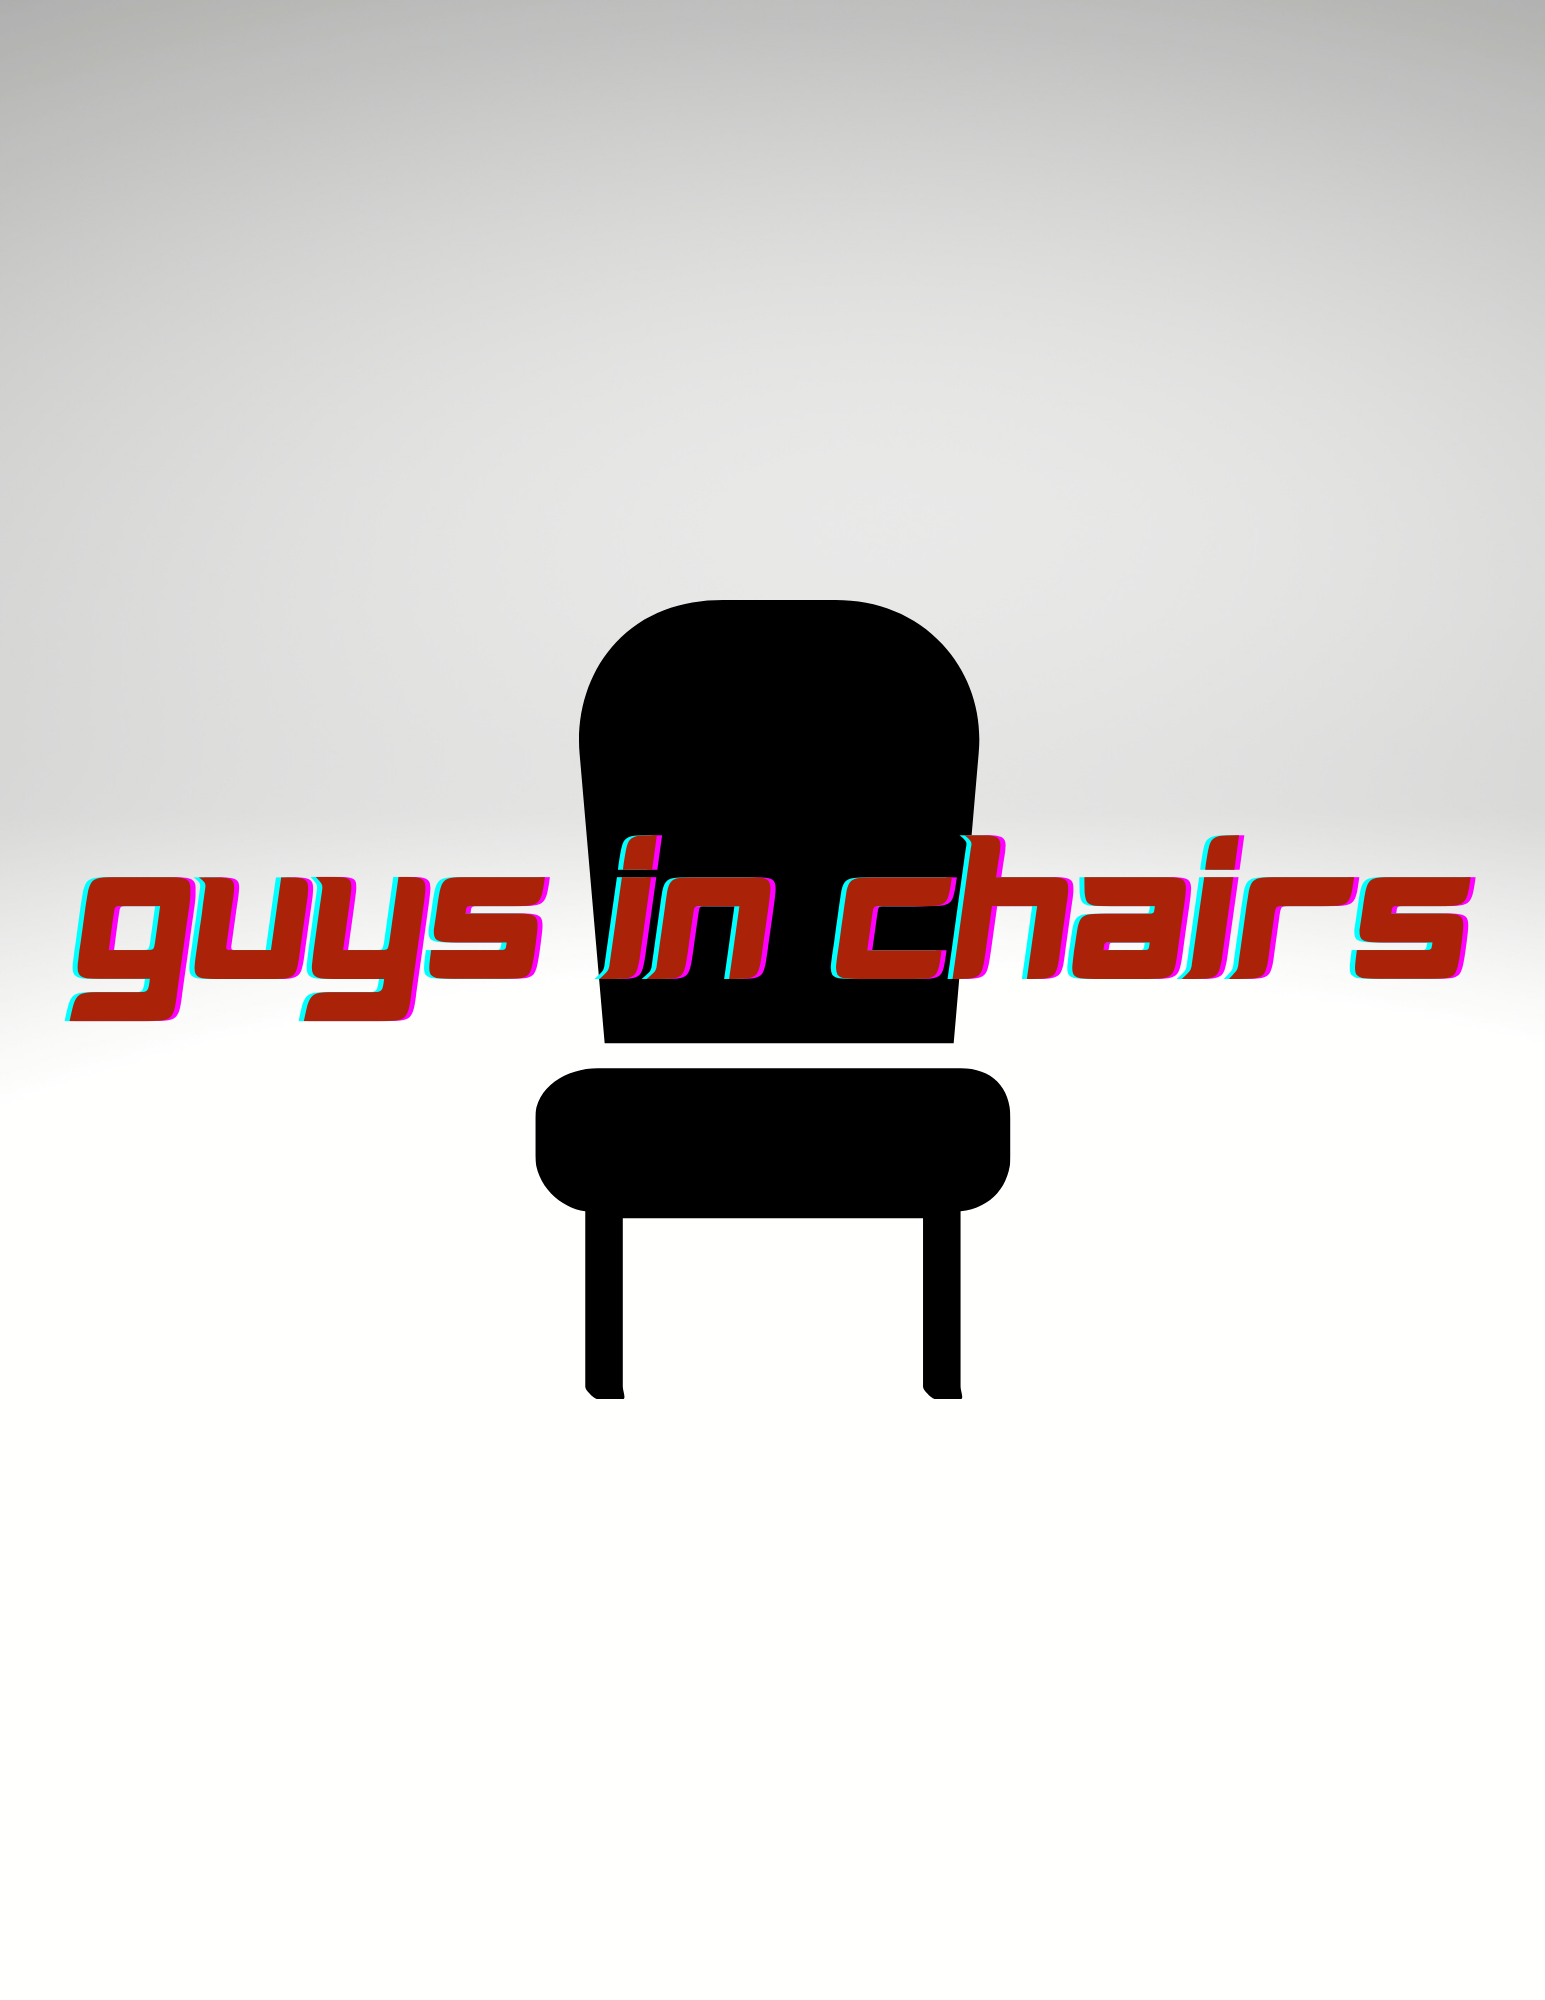 Guys in chairs by Superdillin